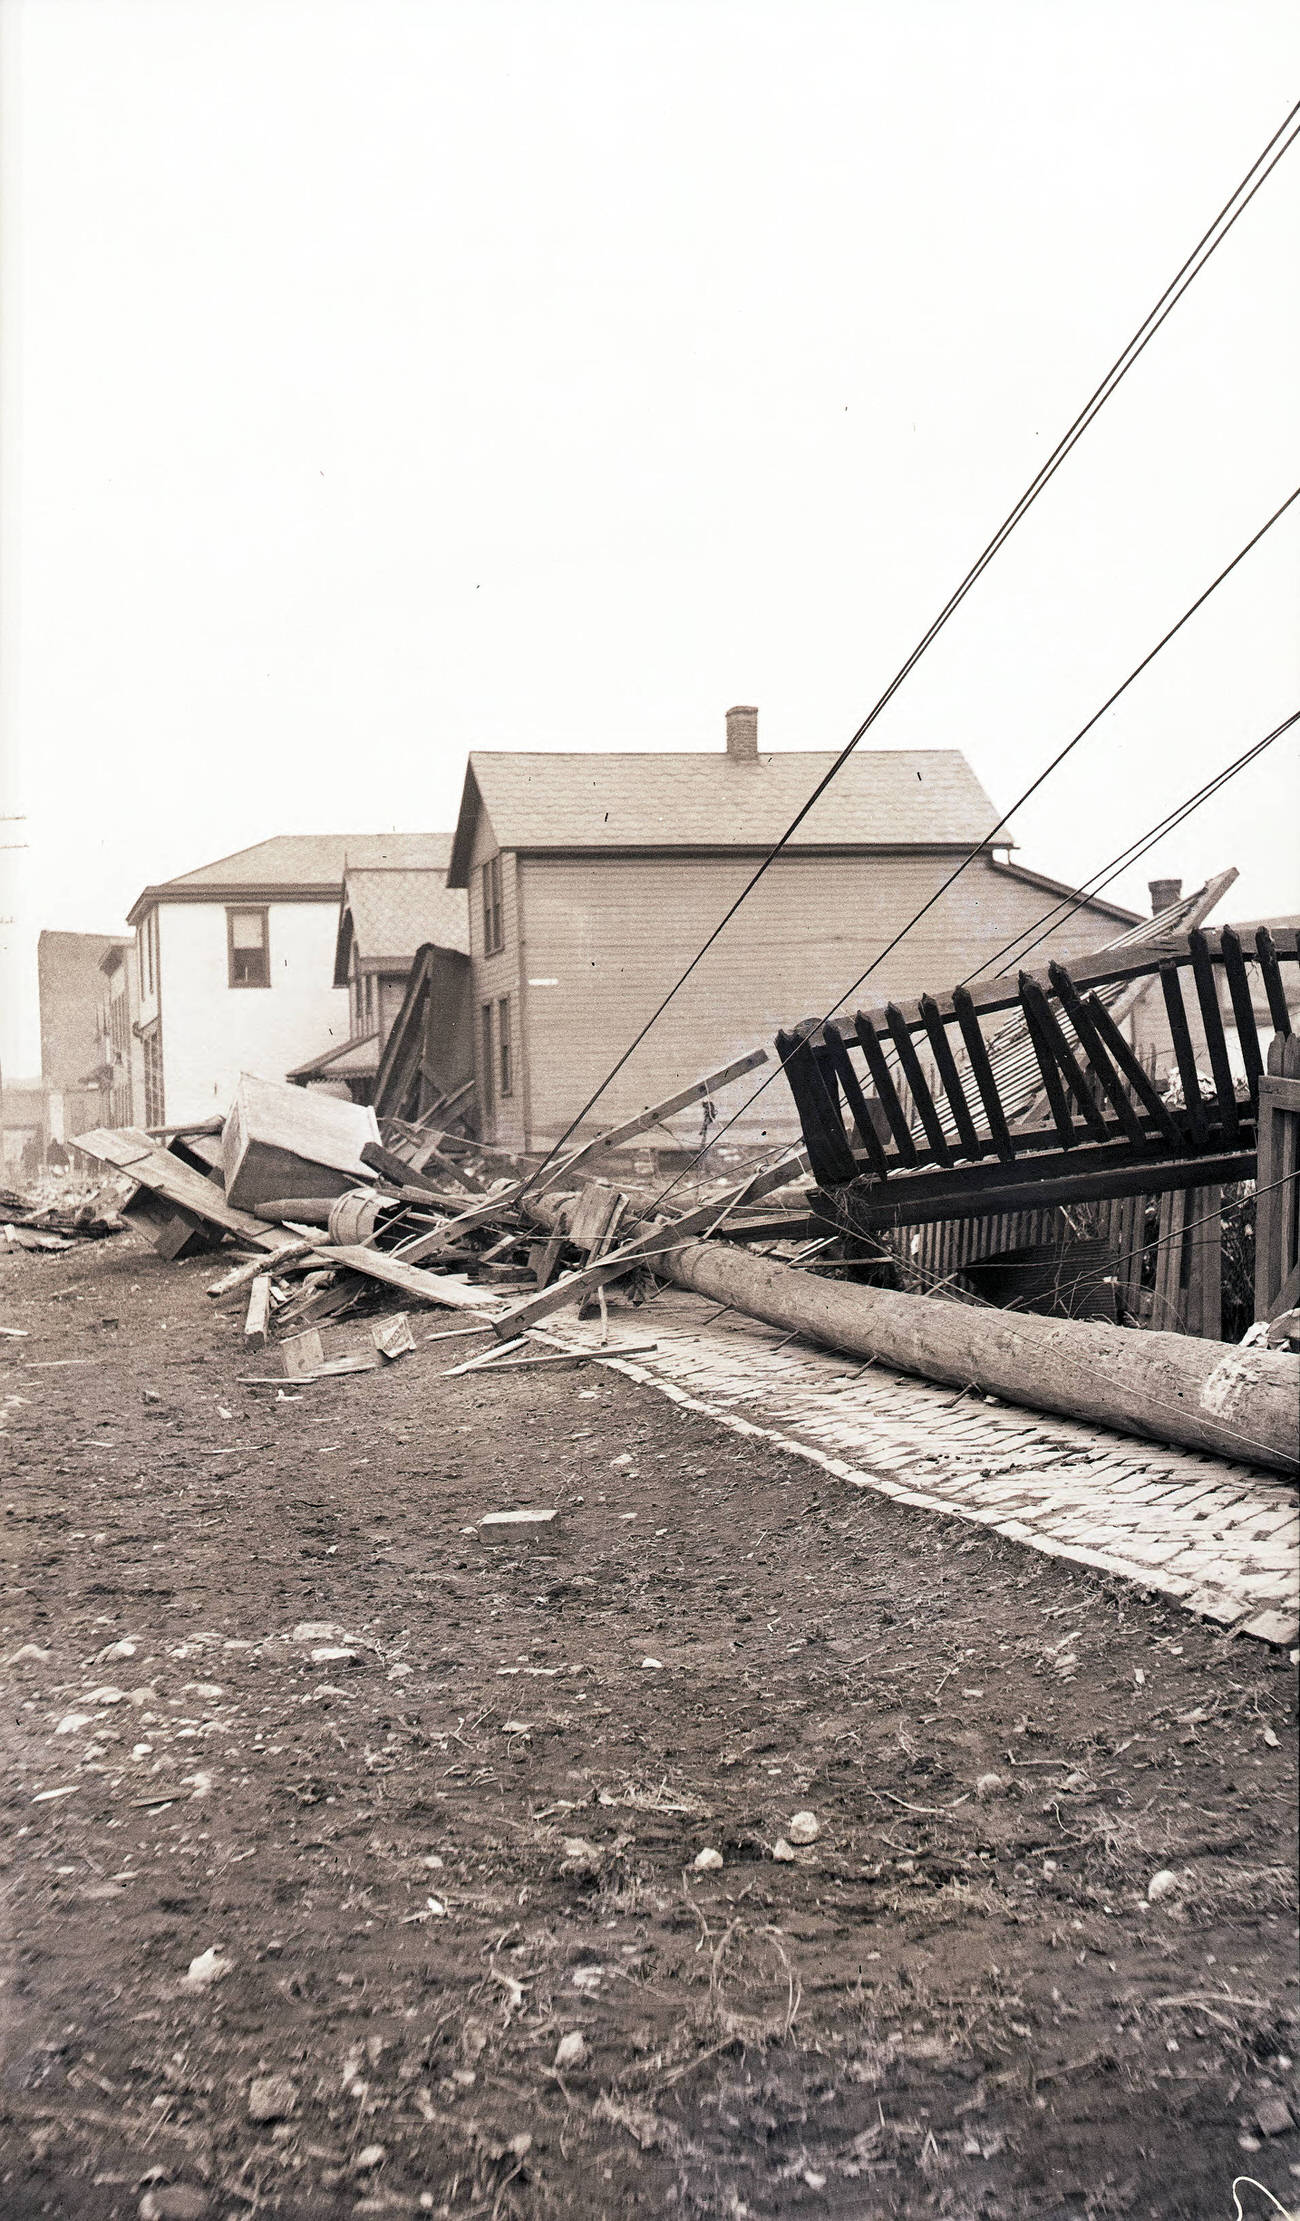 View of downed utility pole and debris from the 1913 flood in Columbus, Ohio, 1913.